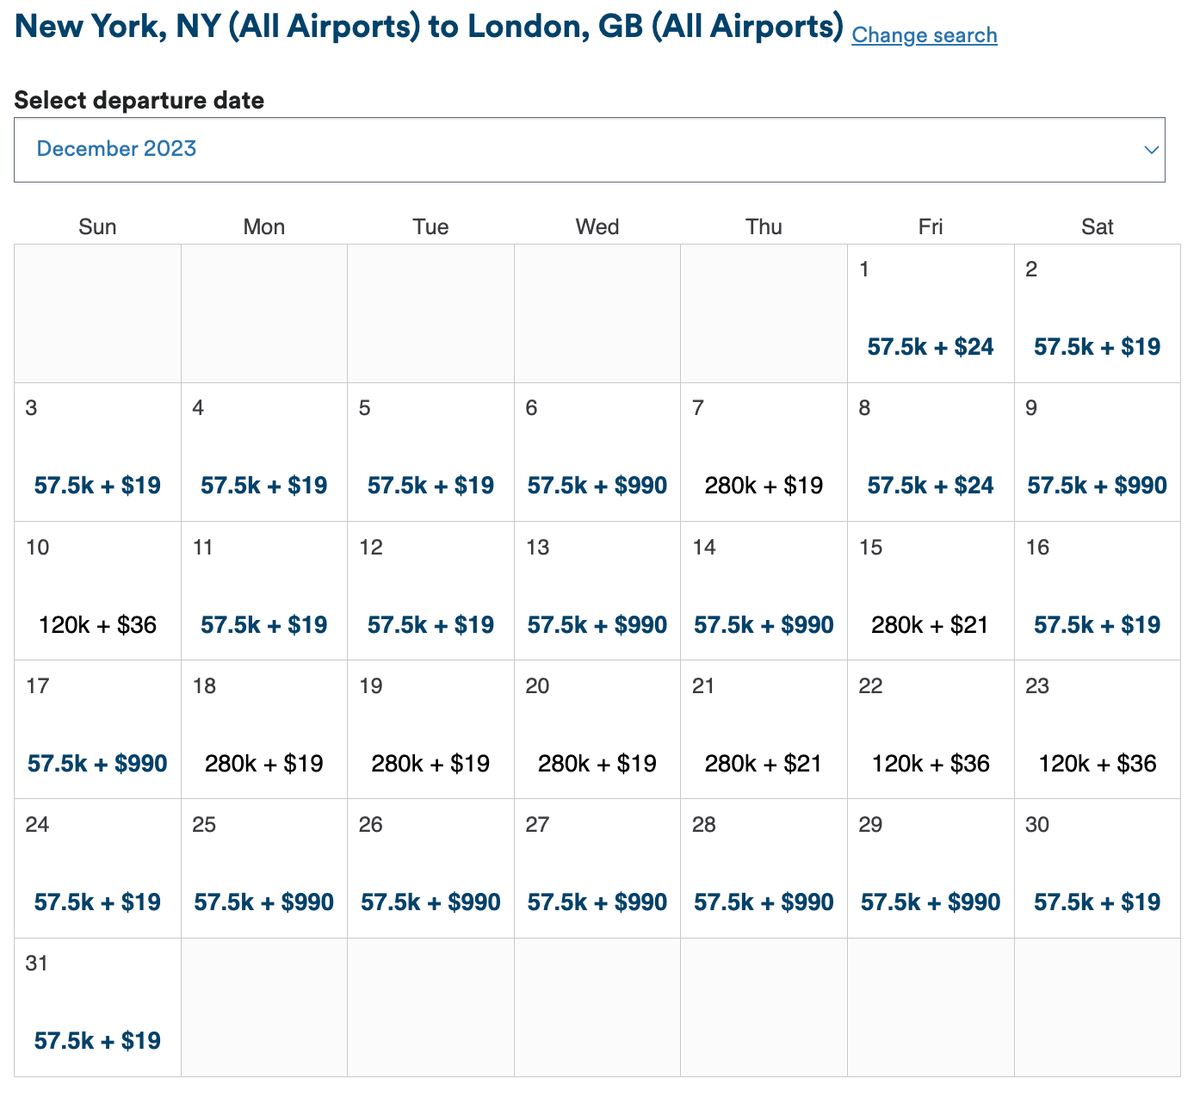 New York to London availability in December